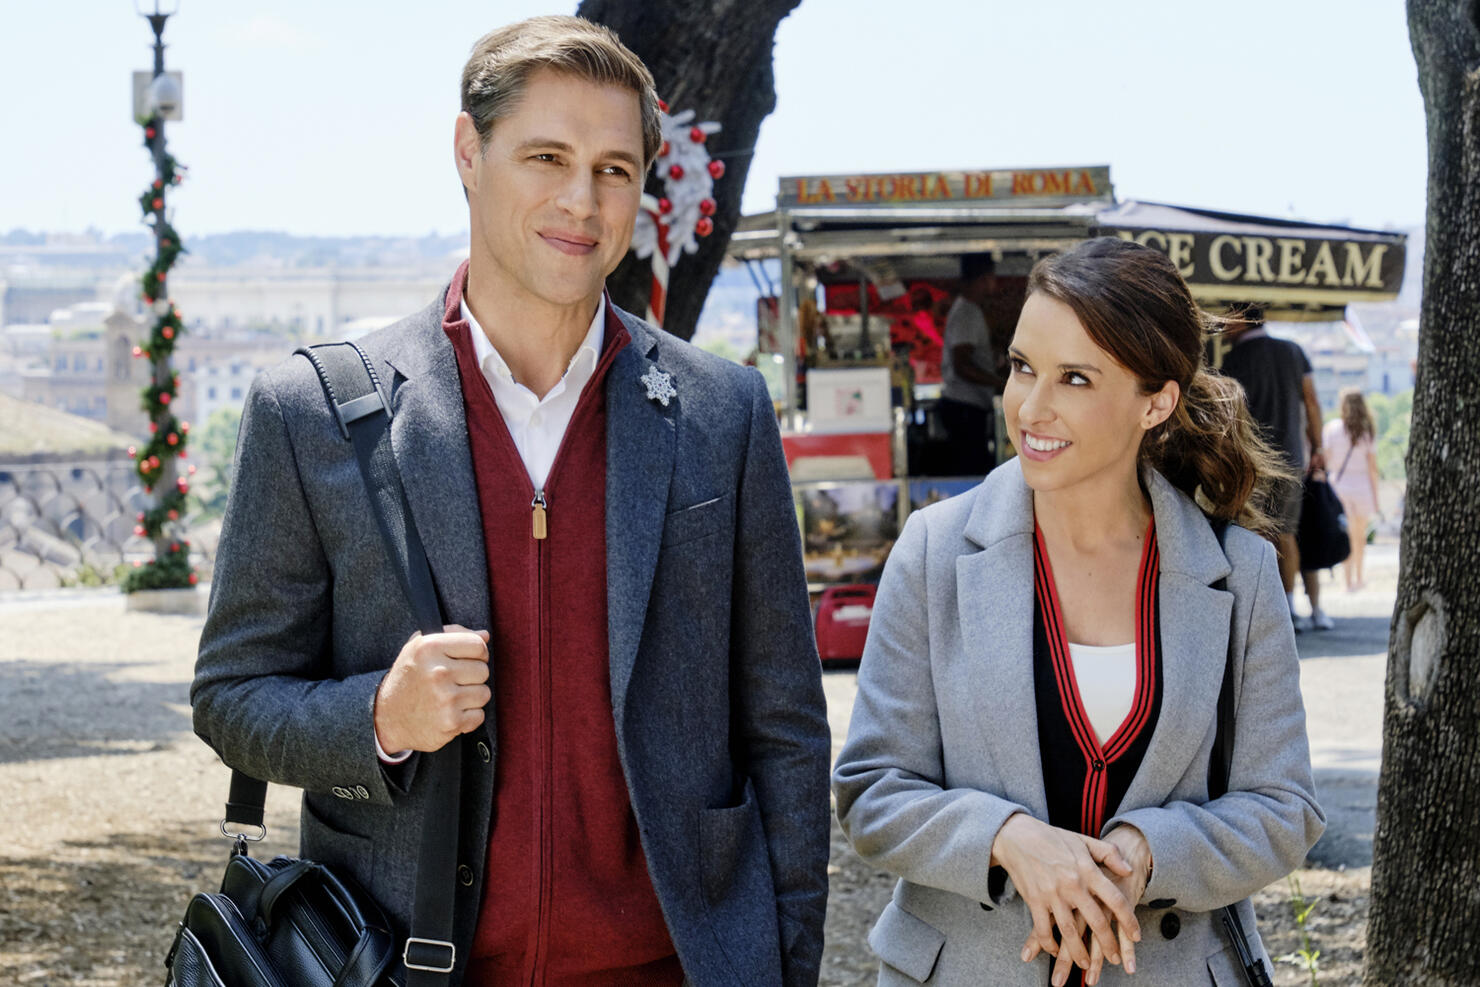 Hallmark Reveals Complete Christmas Movie Lineup For 2020 | iHeart